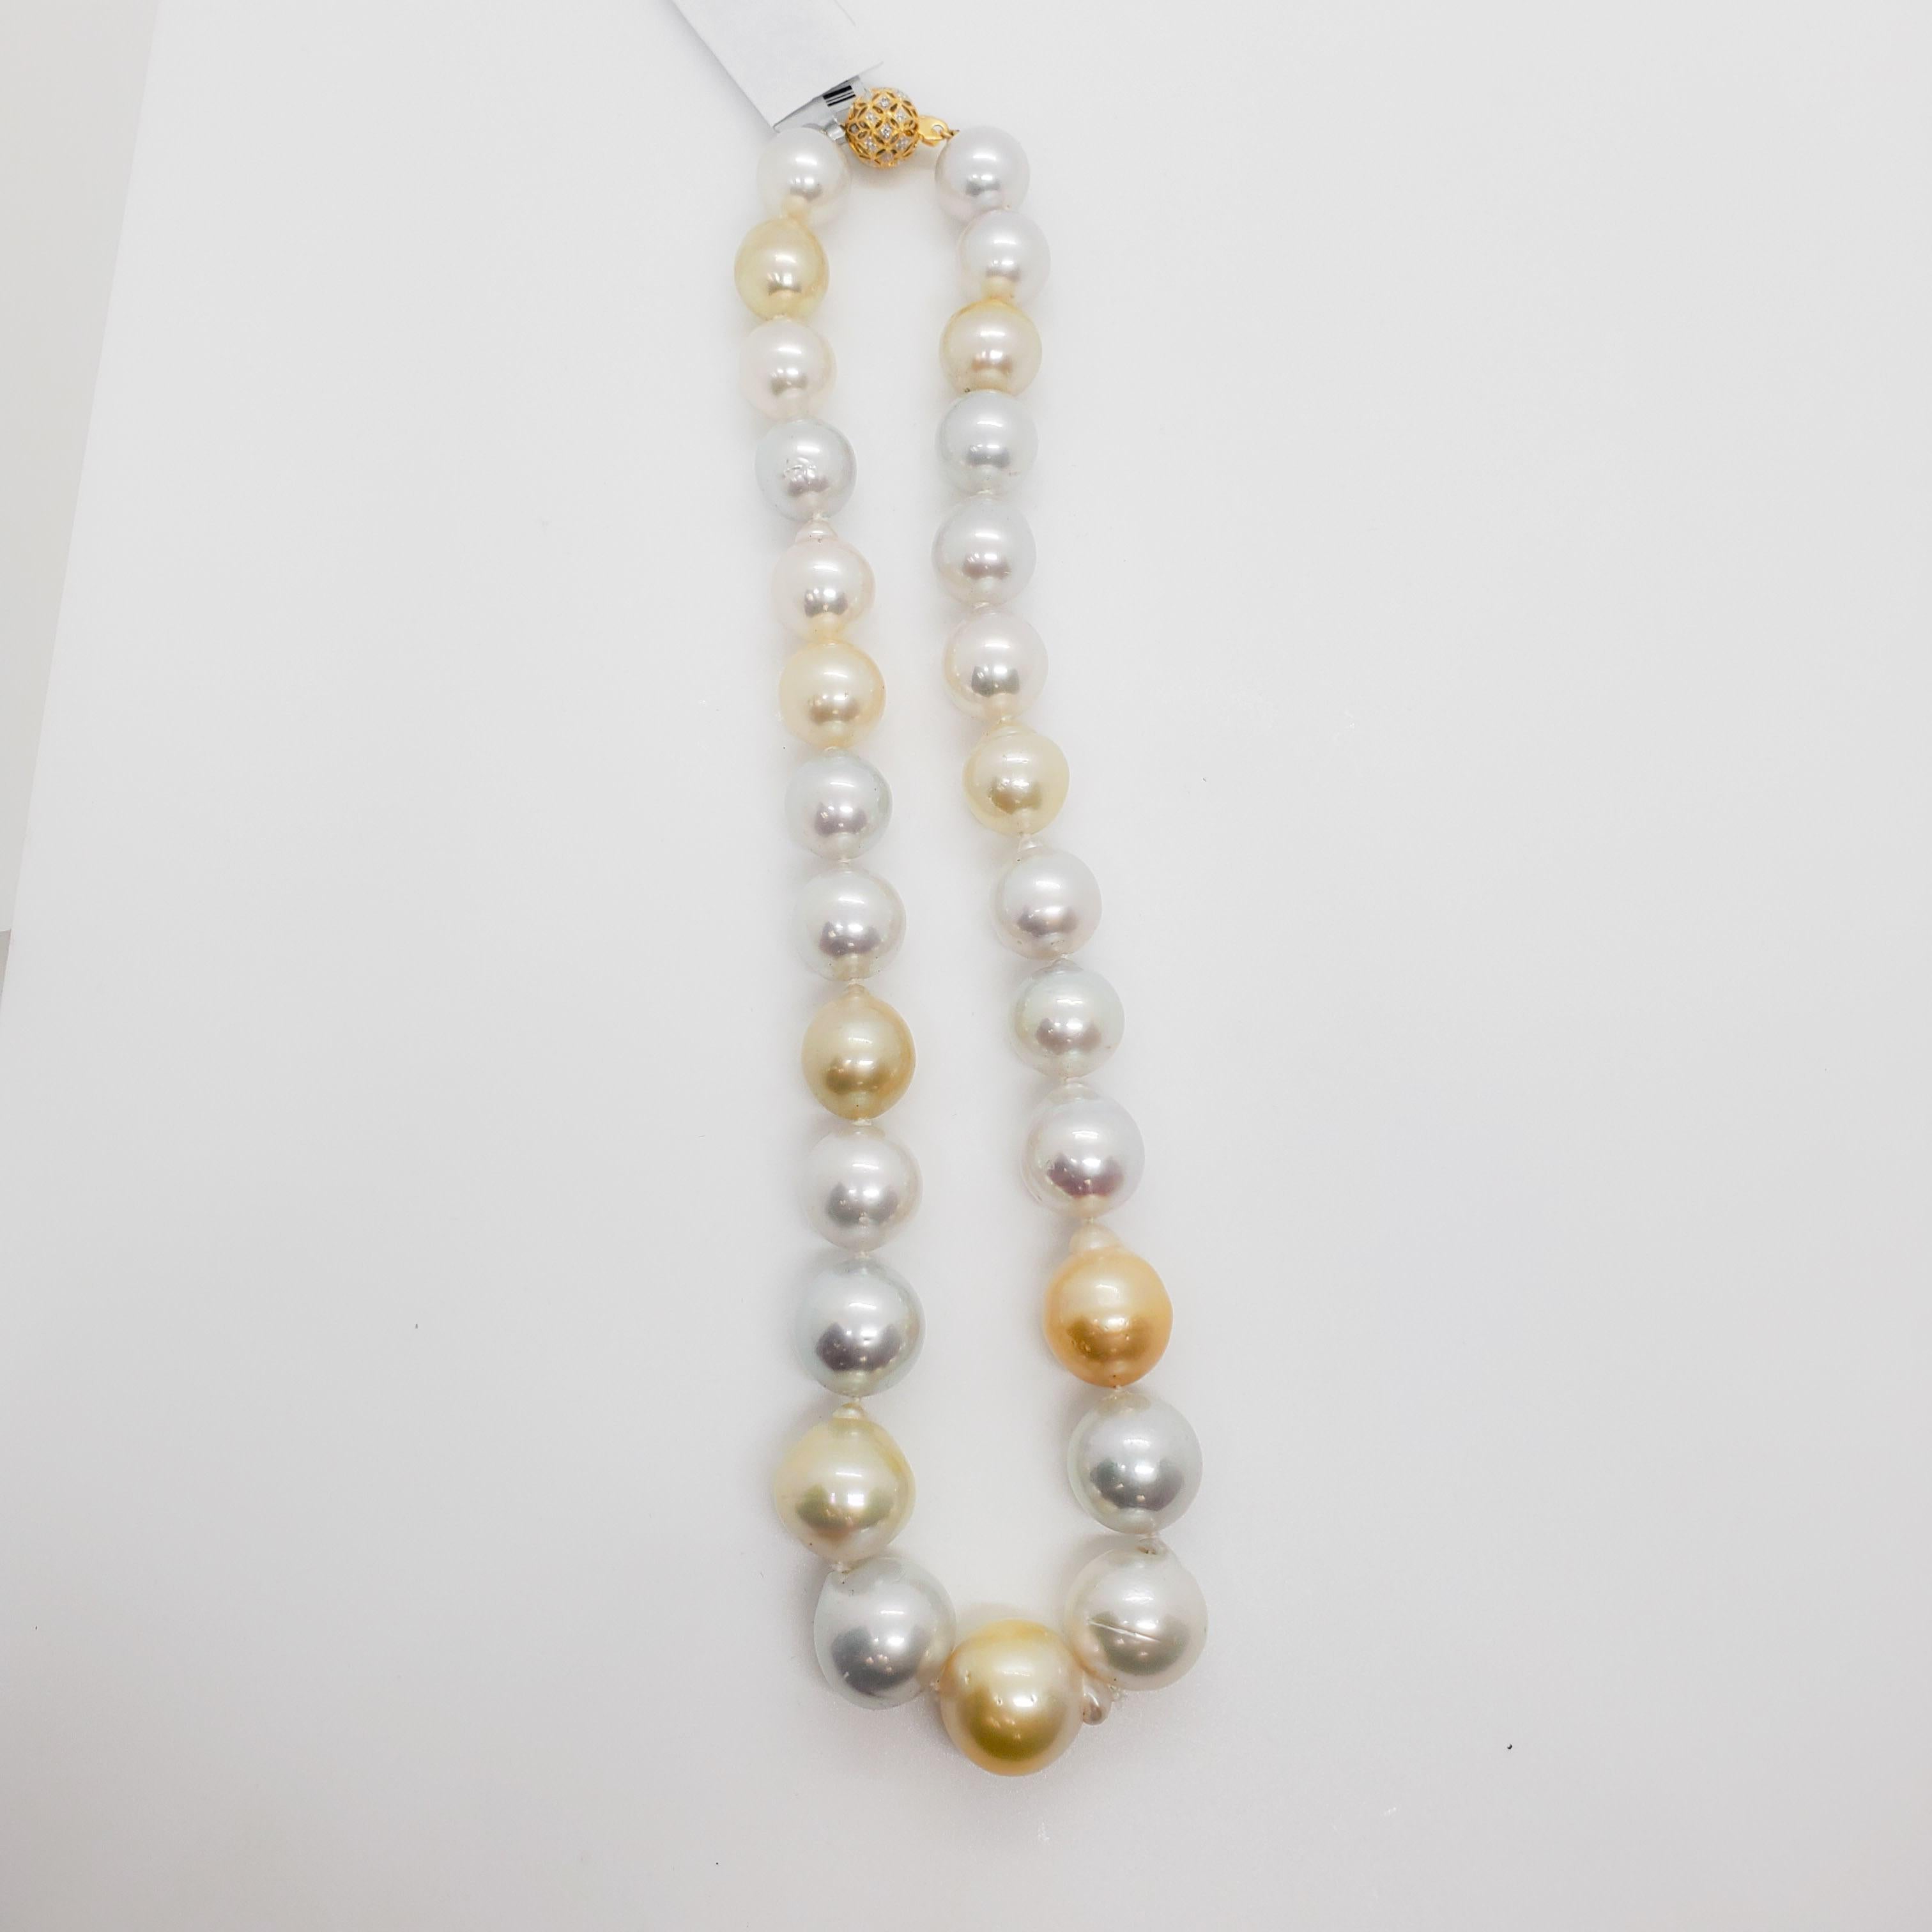  White and Yellow South Sea Pearl Necklace with Diamond Clasp For Sale 6